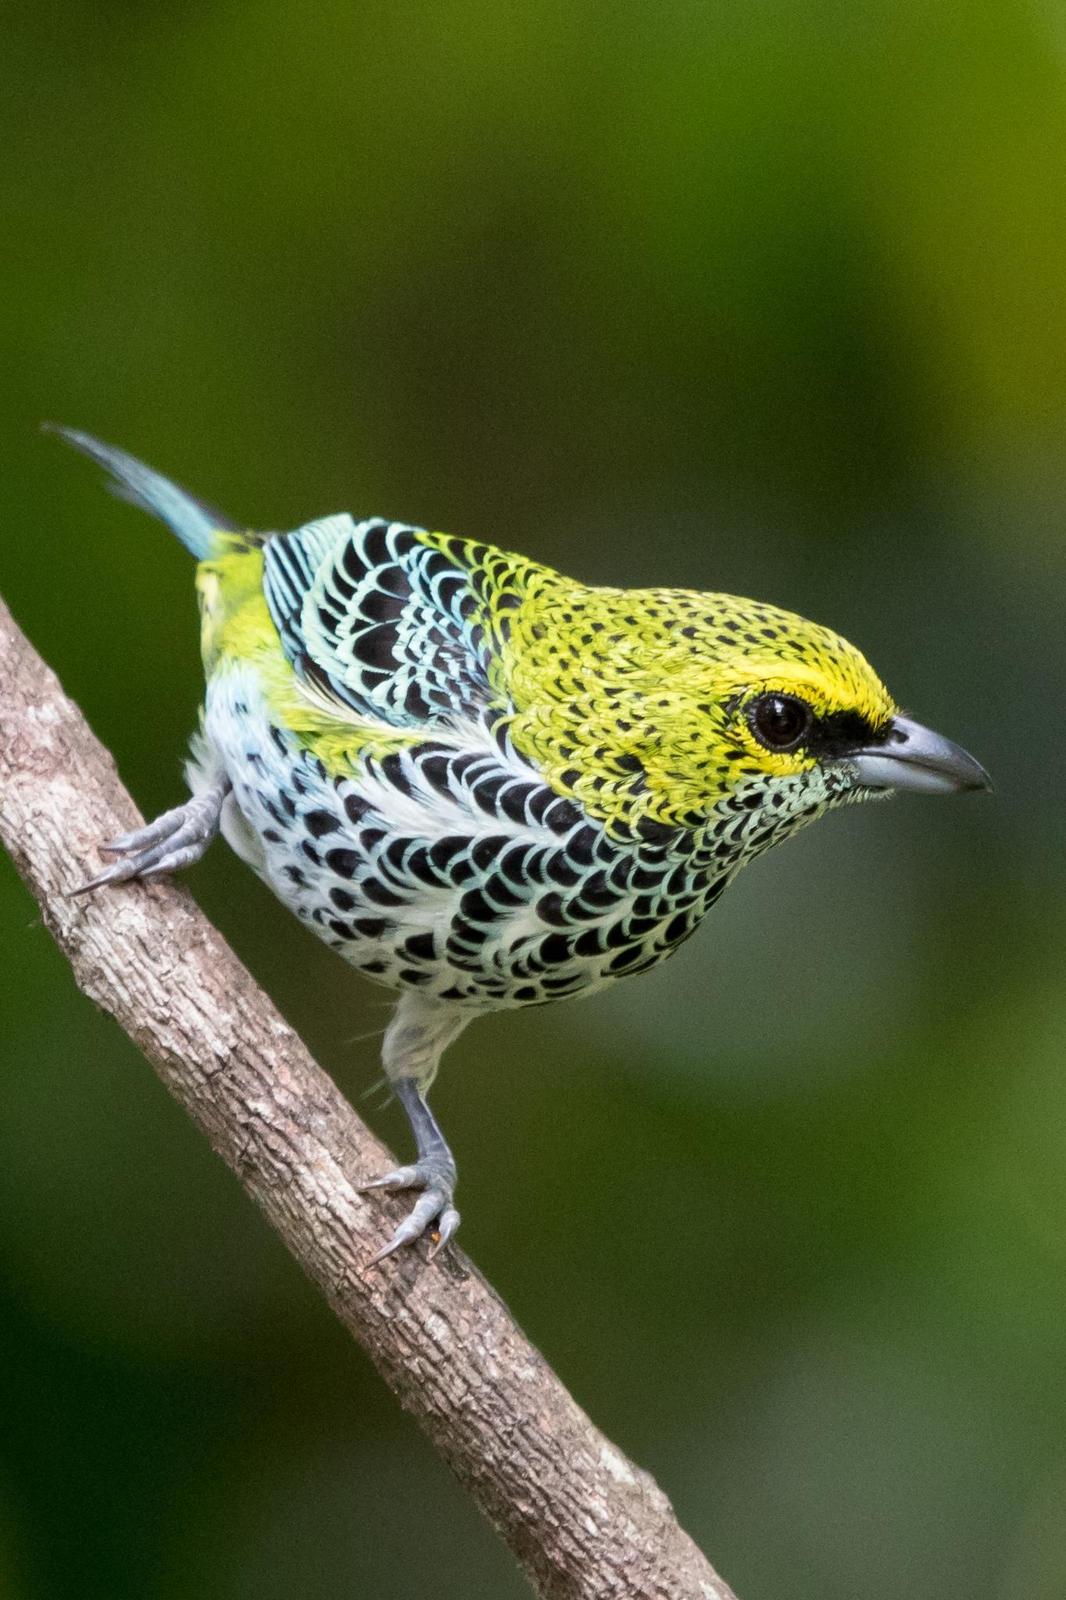 Speckled Tanager Photo by Ashley Bradford